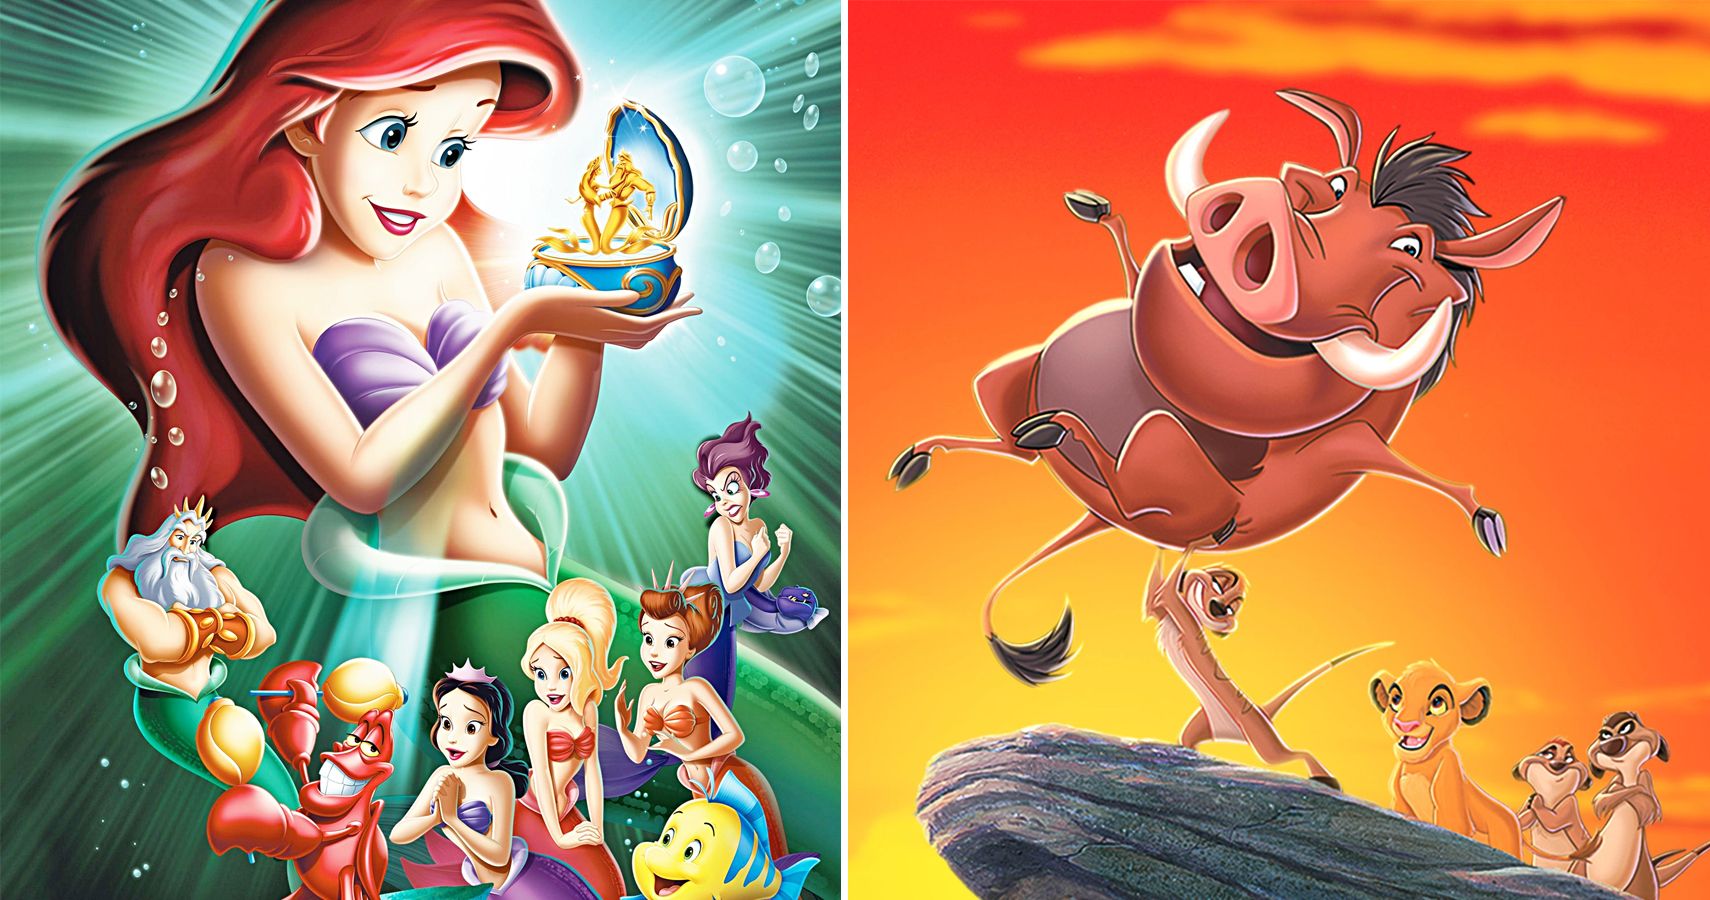 Disney The 10 Best DirectToVideo Sequels (According To IMDb)